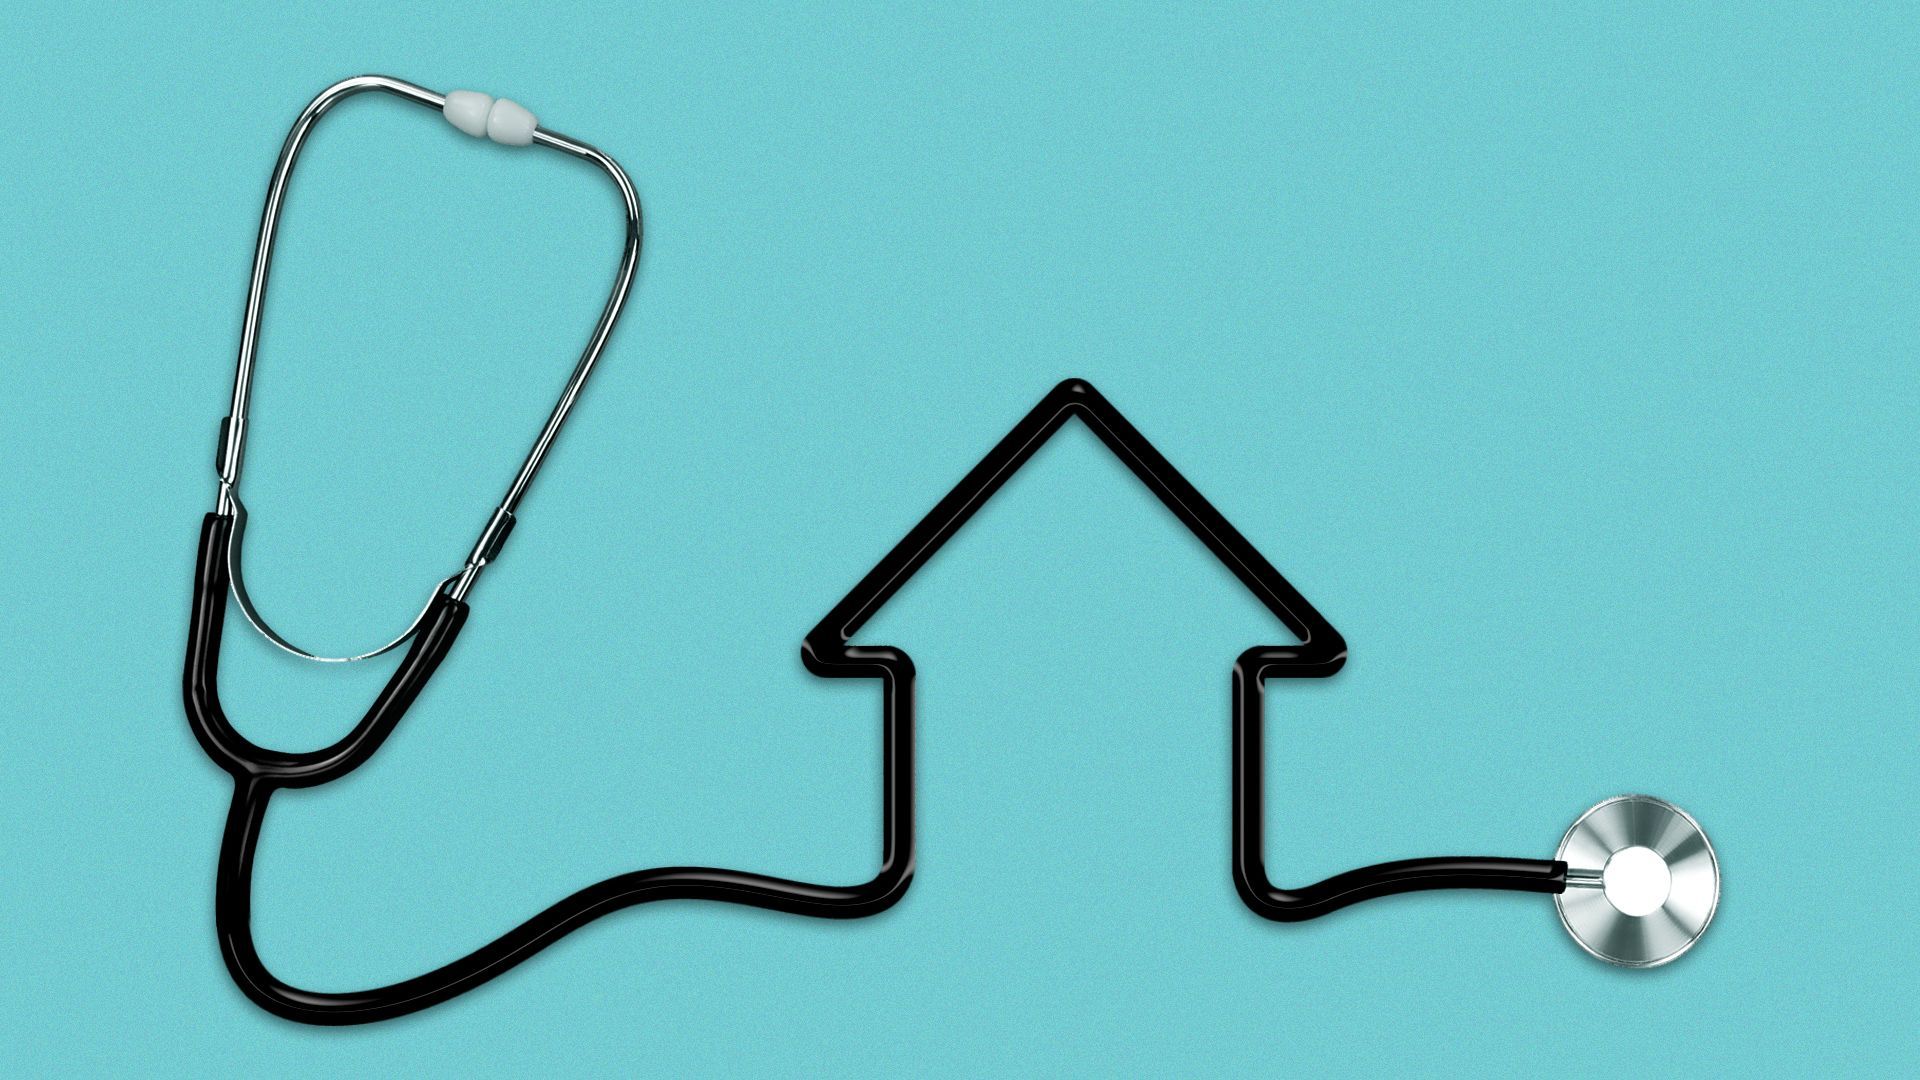 Illustration of a stethoscope tube making the shape of a house.